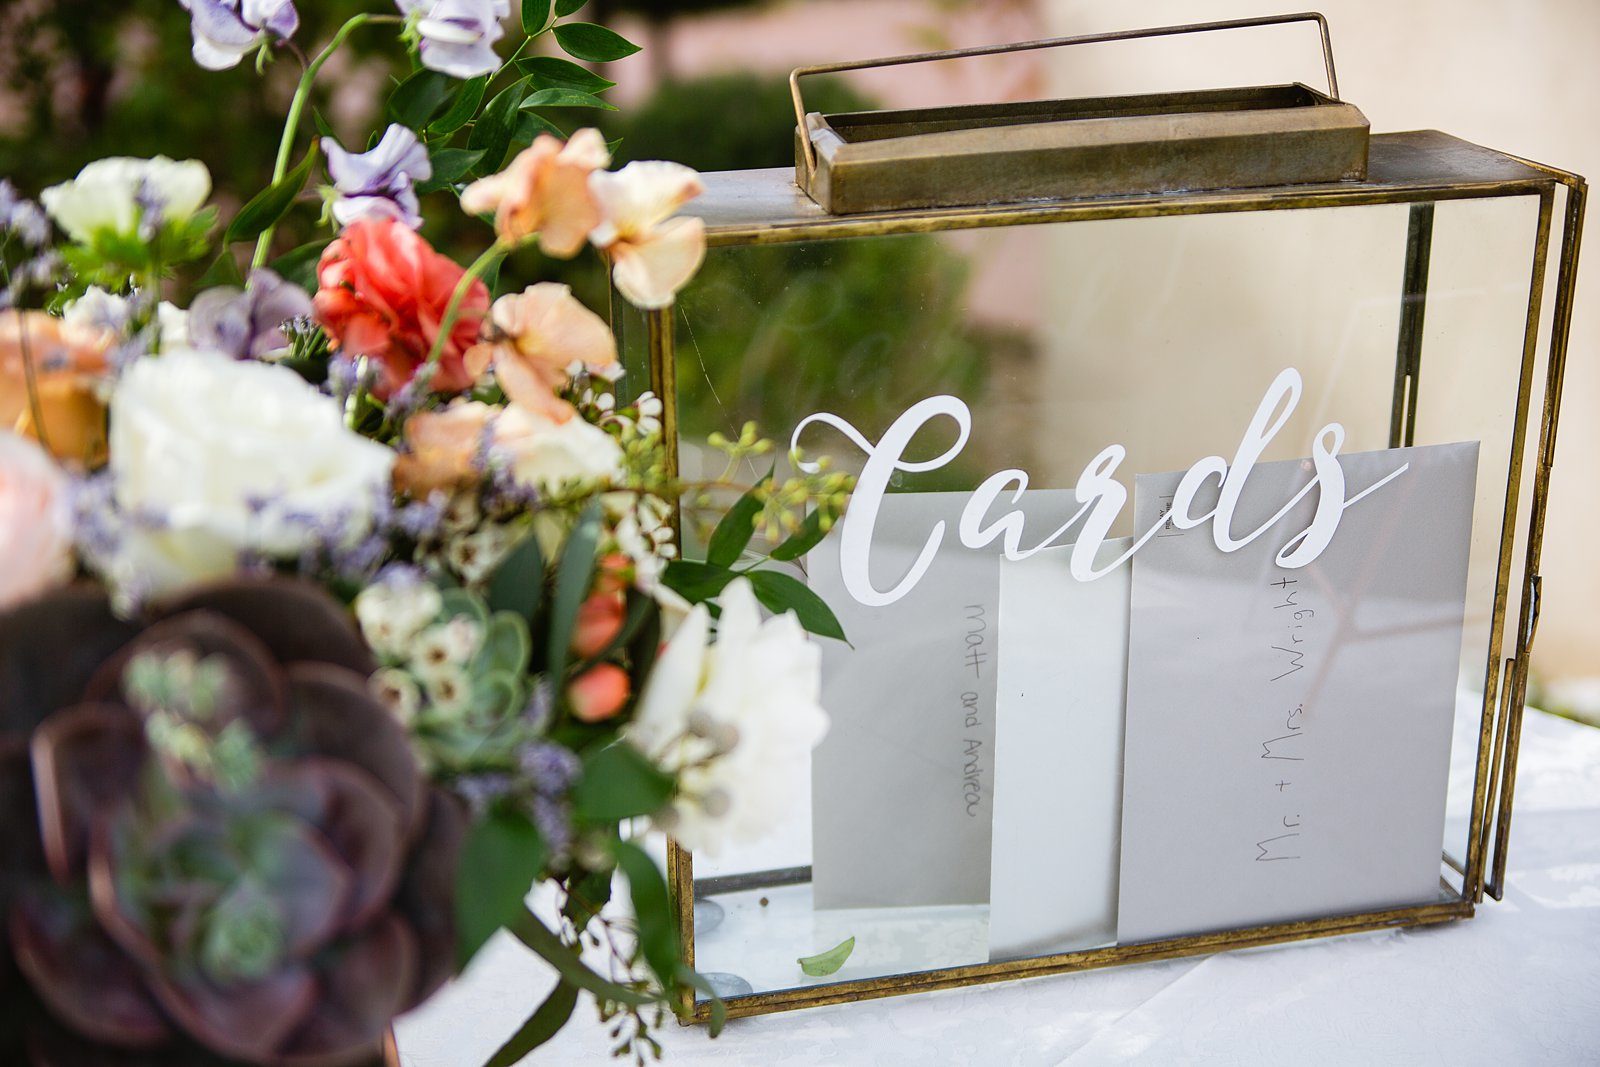 Vintage card box on gift table photographed by PMA Photography.